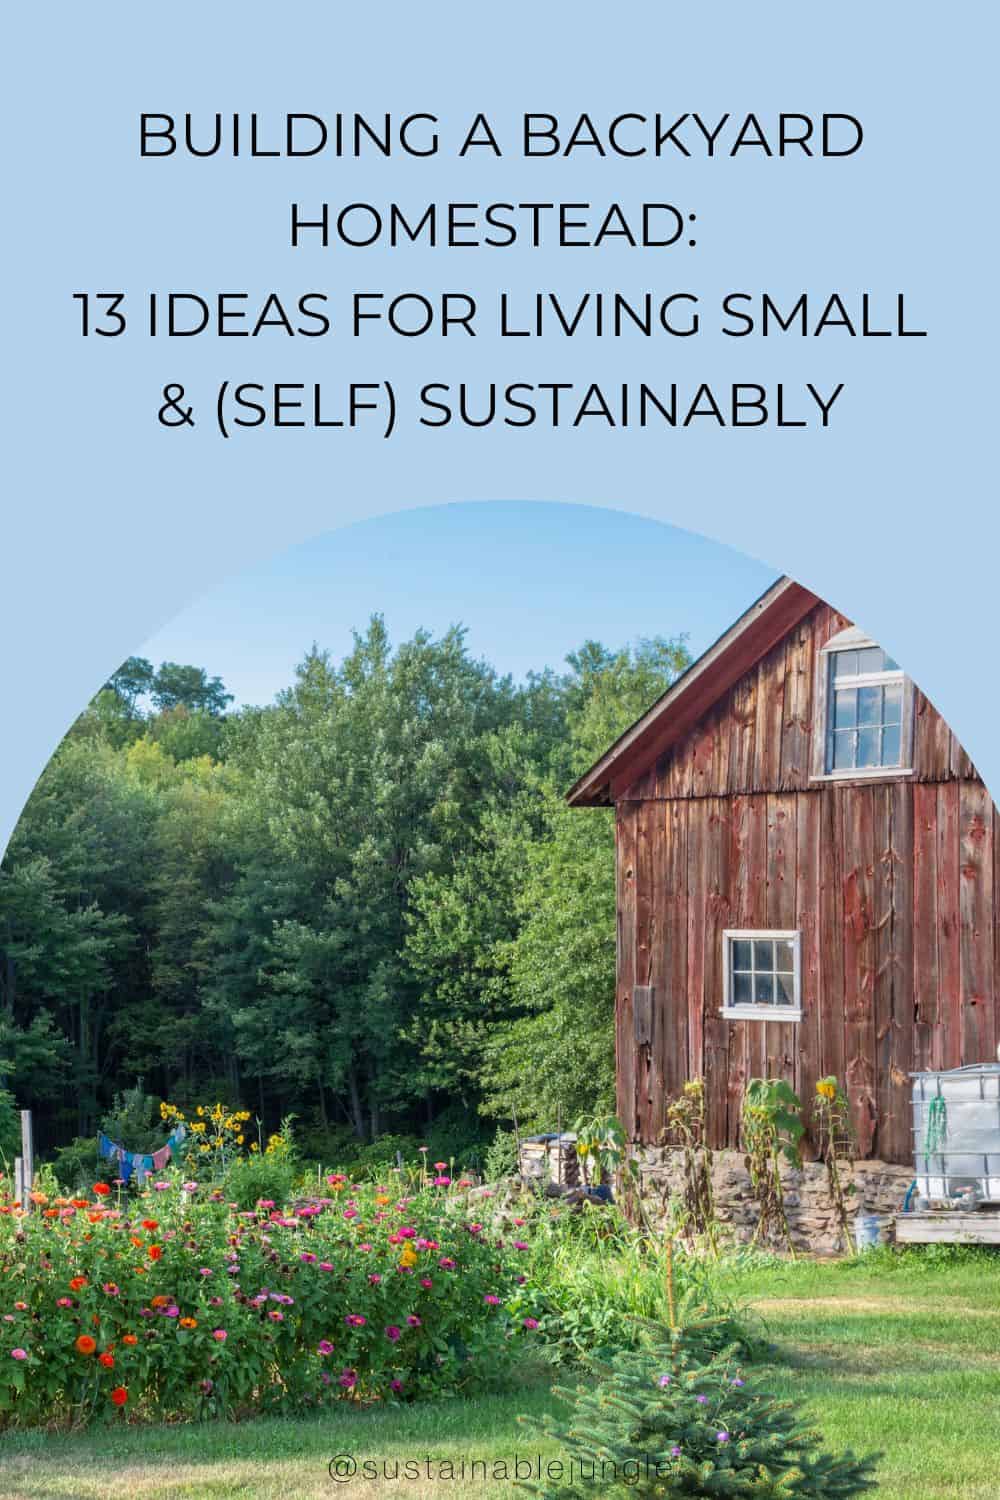 Building A Backyard Homestead: 13 Ideas For Living Small & (Self) Sustainably Image by andykazie #backyardhomestead #backyardhomesteading #backyardhomesteadudeas #smallhomesteadgardenideas #smallhomesteading #sustainablejungle